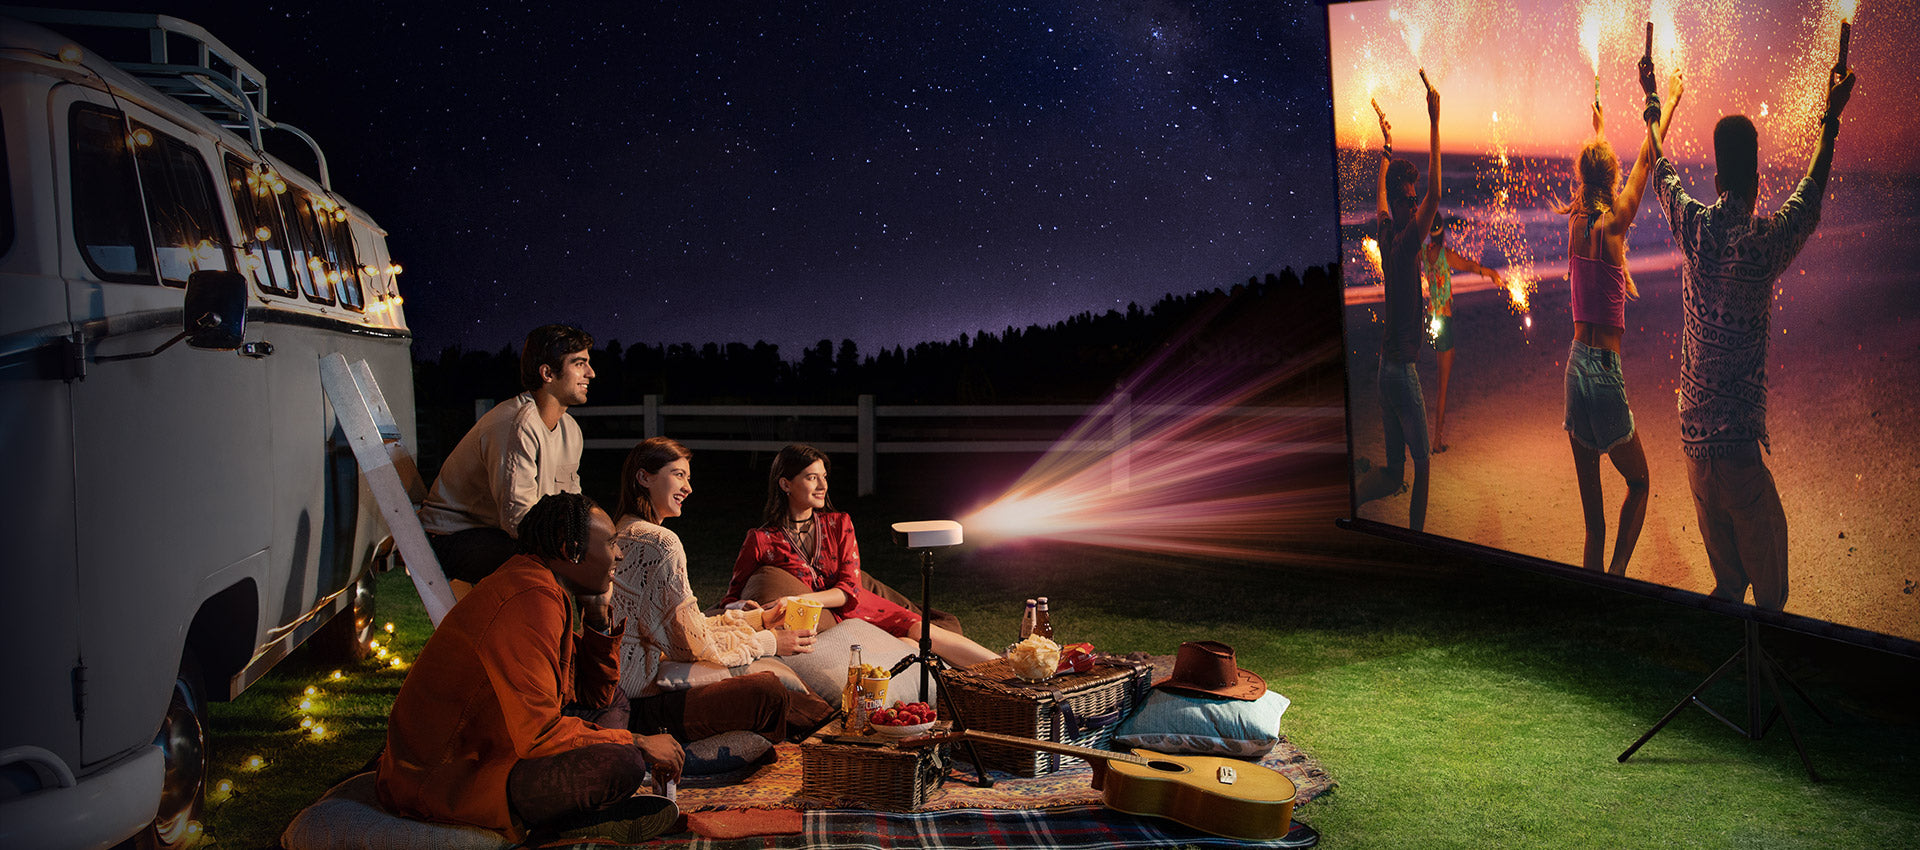 Wholesale ZDSSY P350L Portable Portable Projector Nebula 4000 Lumens, Full  HD LED, WiFi, Smart Home Theater Beamer From Bai10, $92.51